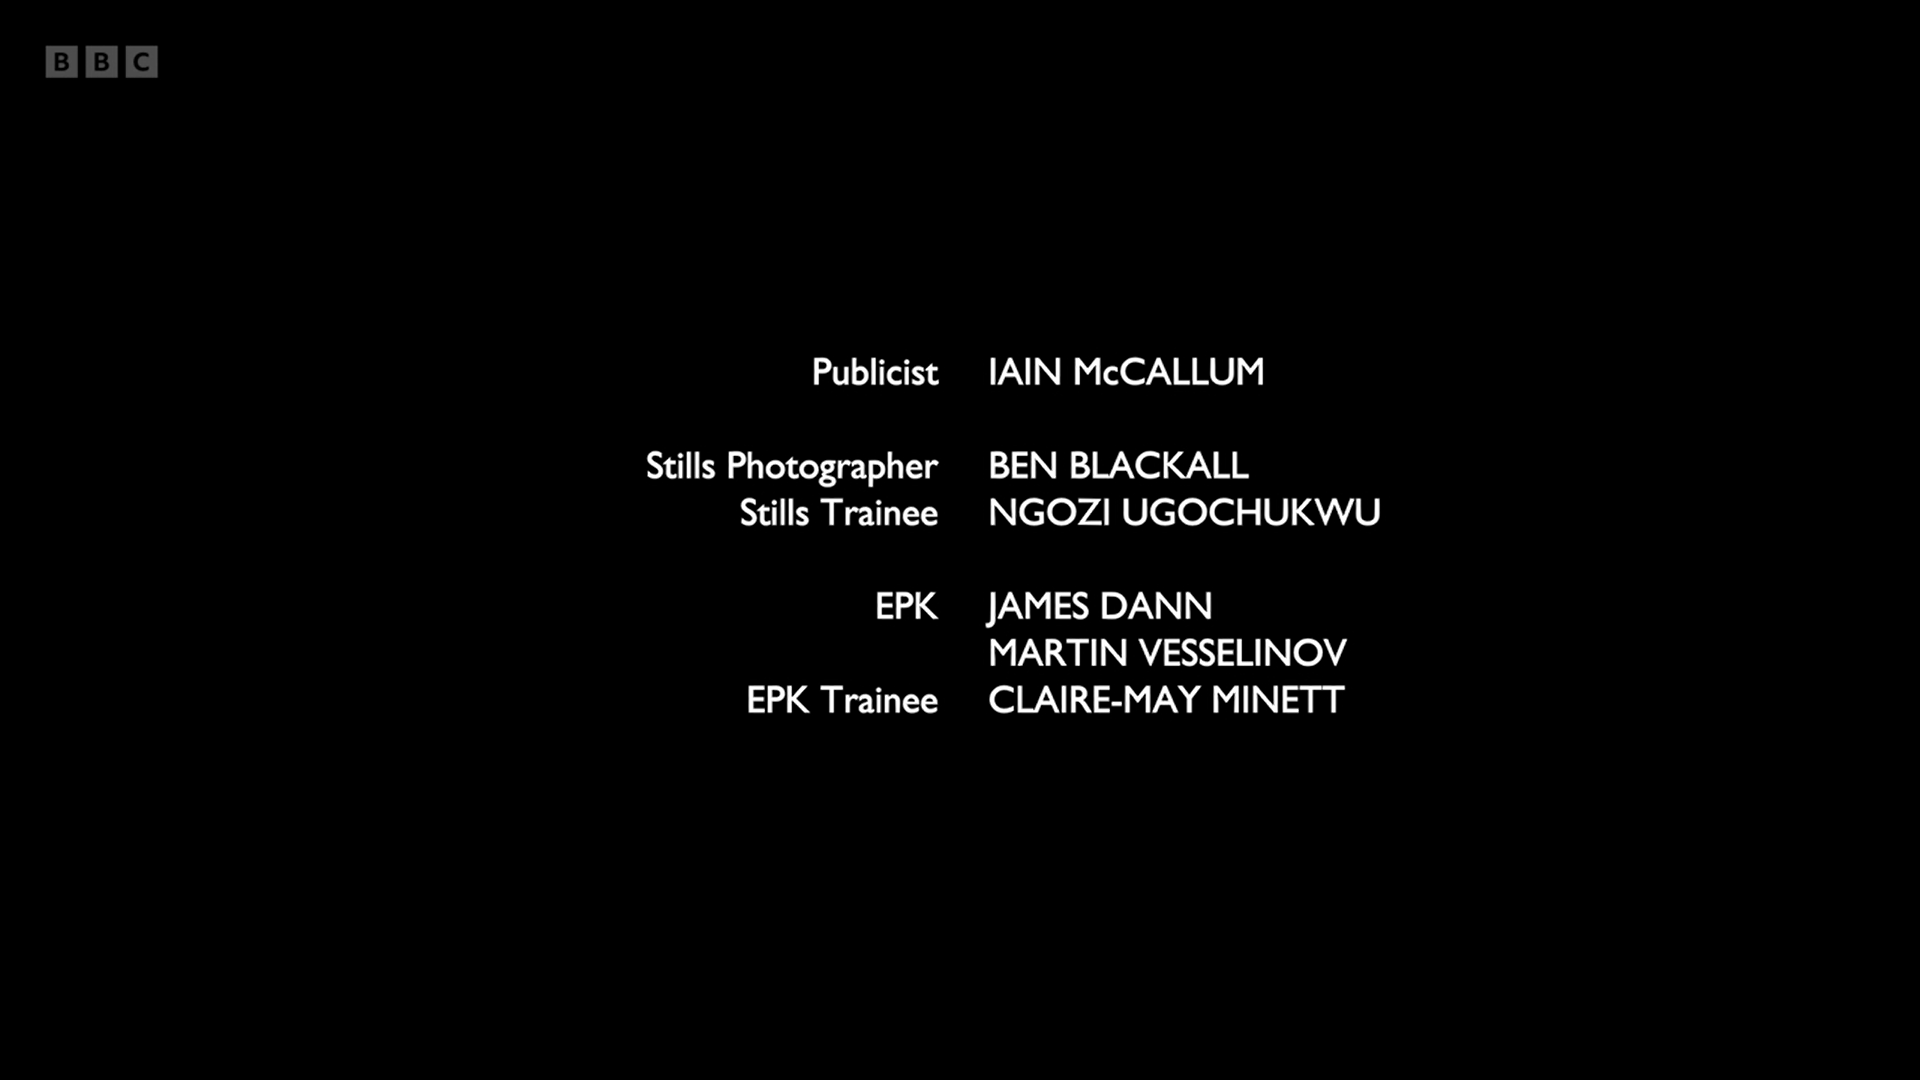 A screen shot of the credits from the first Ralph & Katie episode showing Claire May listed as EPK Trainee